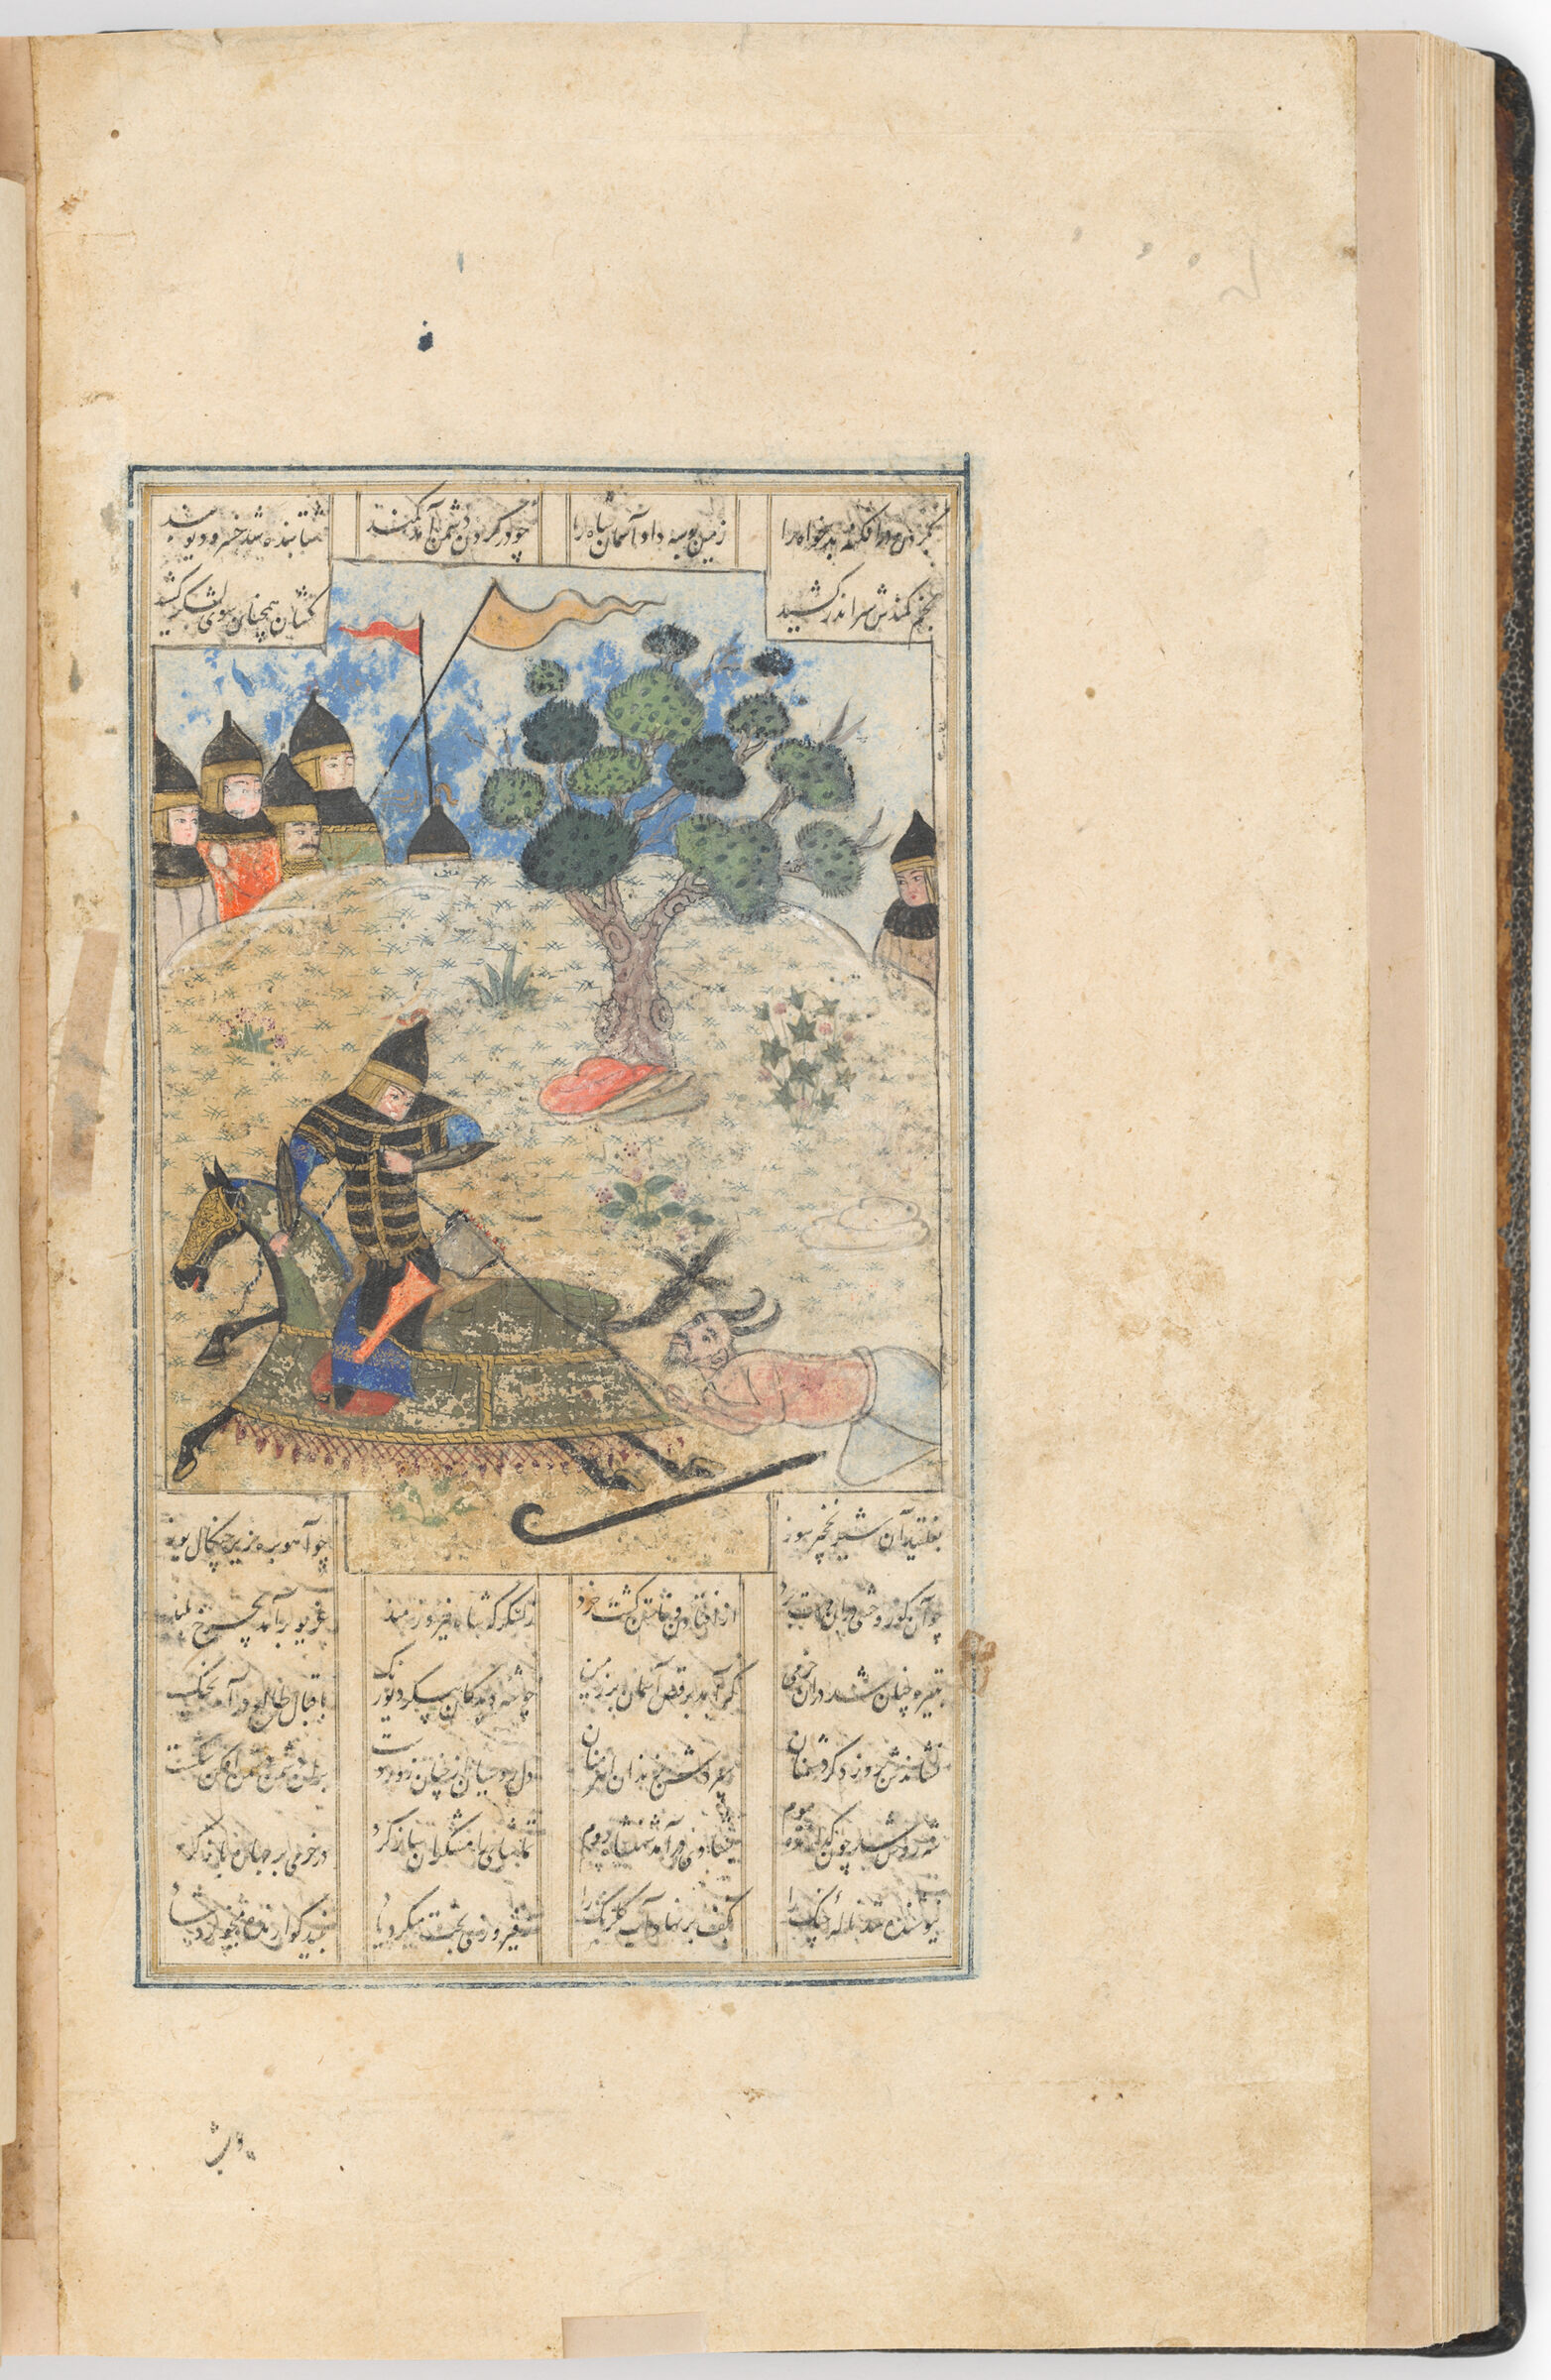 Iskandar Lassoing The Russian Demon (Text Recto; Painting Verso Of Folio 163), Painting From A Manuscript Of The Khamsa By Nizami